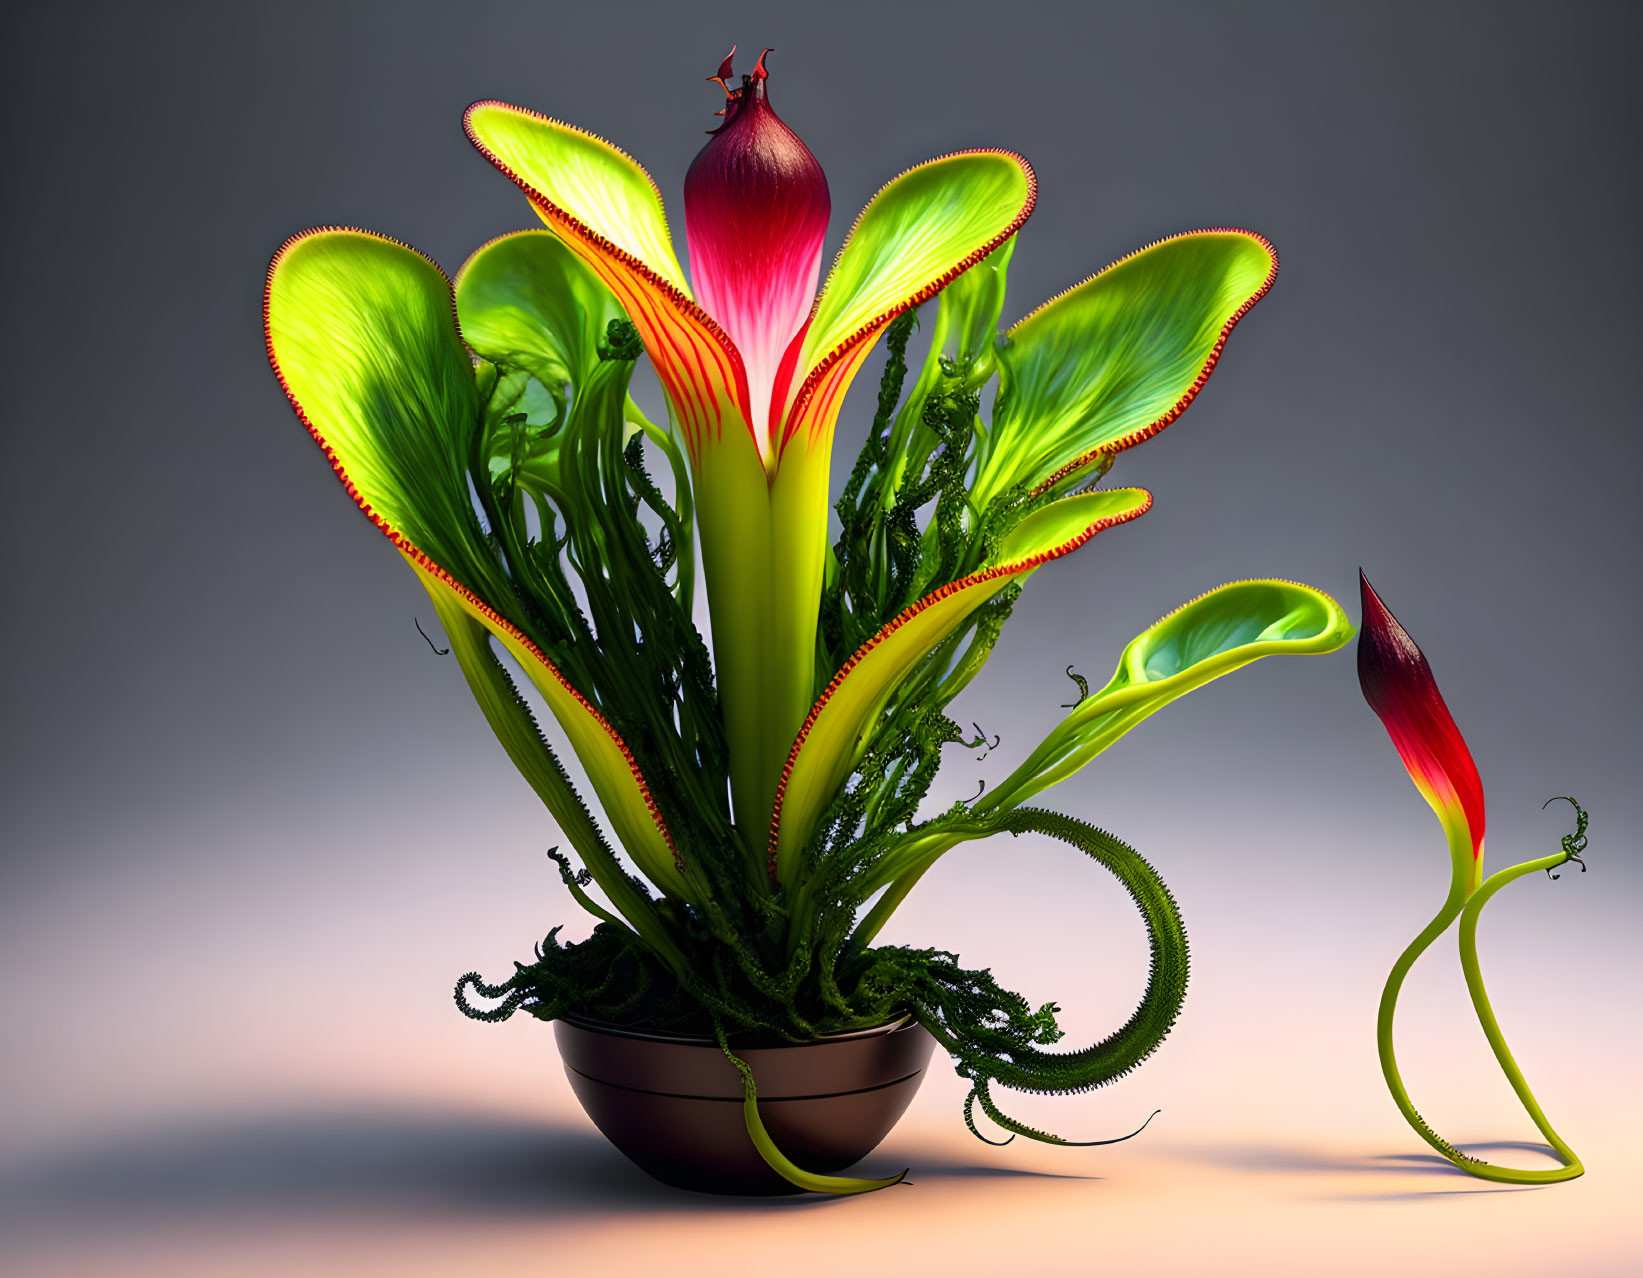 Digitally-created Venus flytrap-inspired plant in pot with glowing green edges and red accents